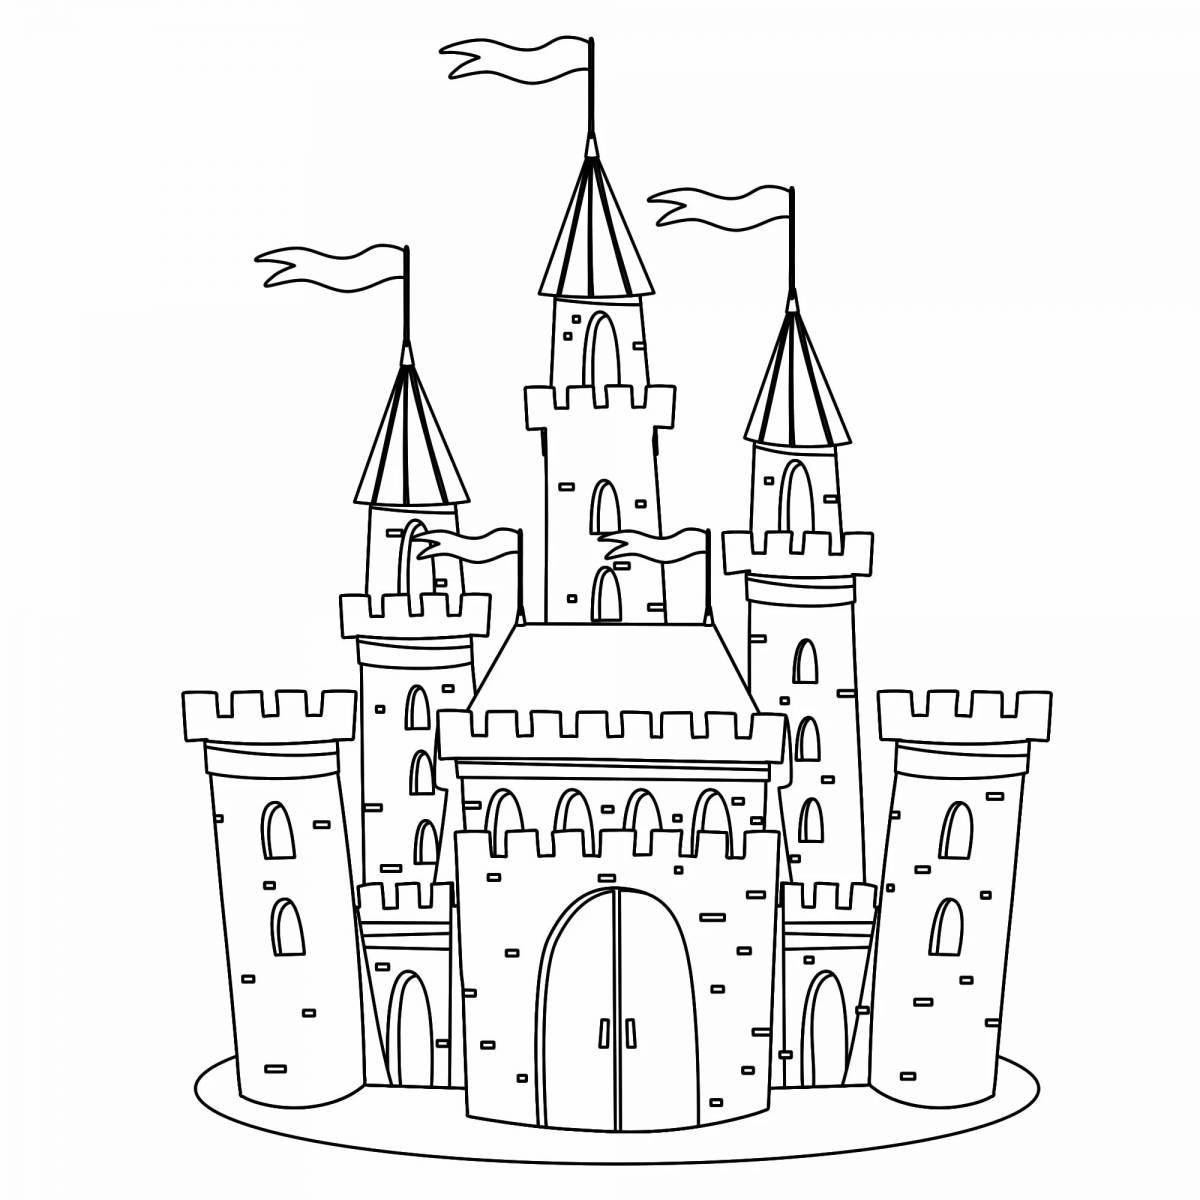 Coloring for children playful fortress